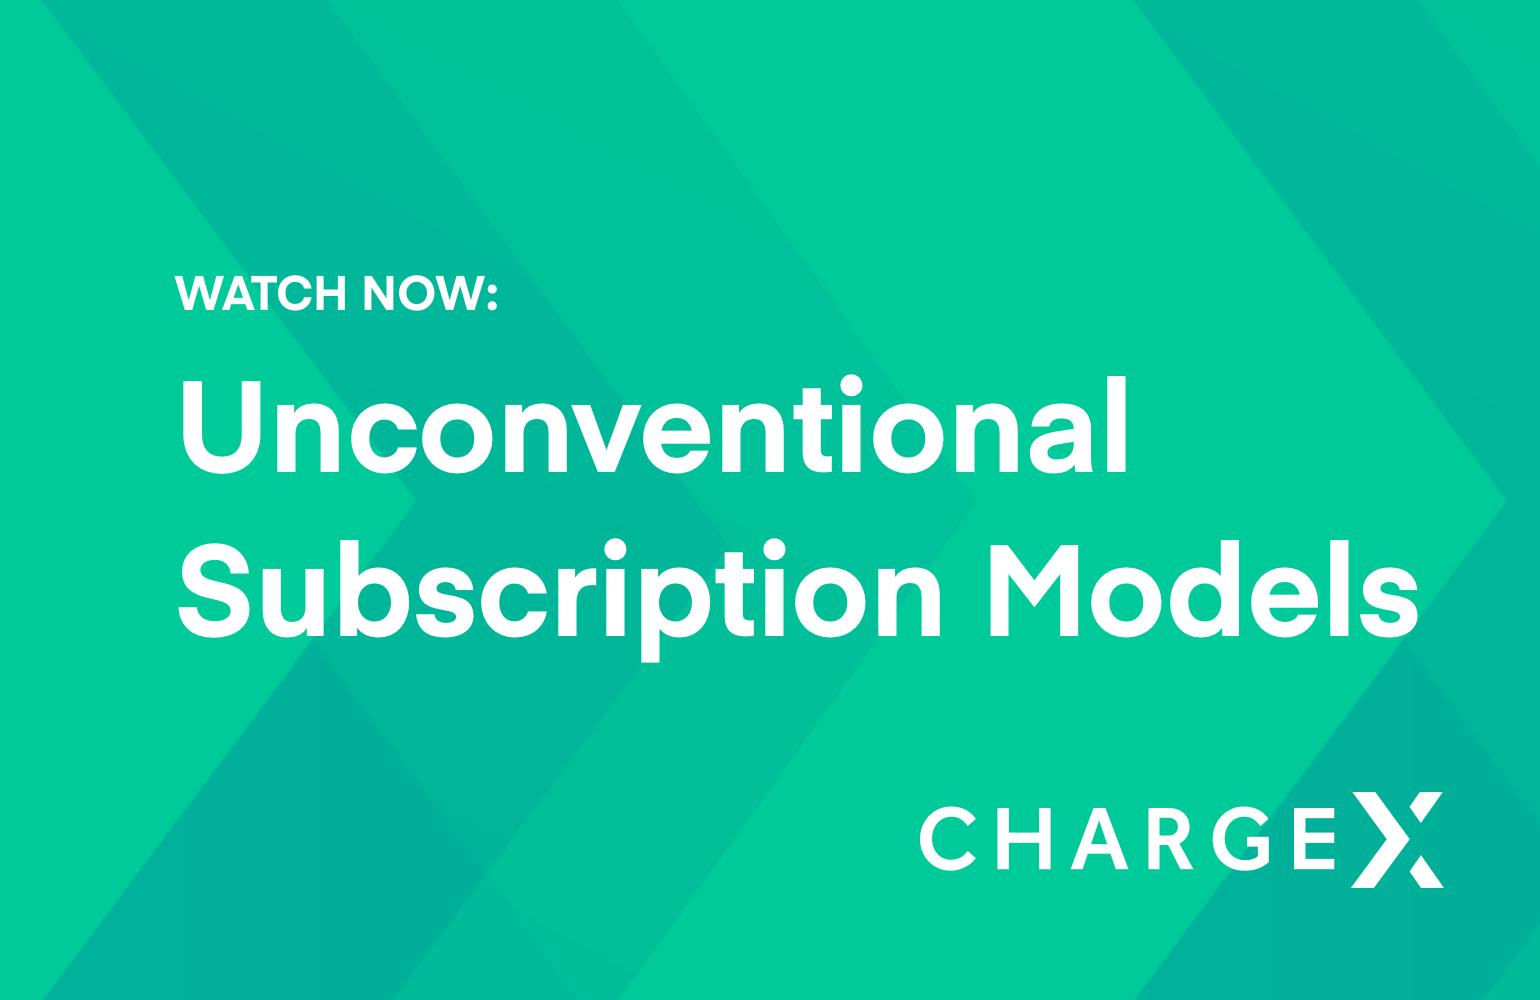 ChargeX: Unconventional subscription models